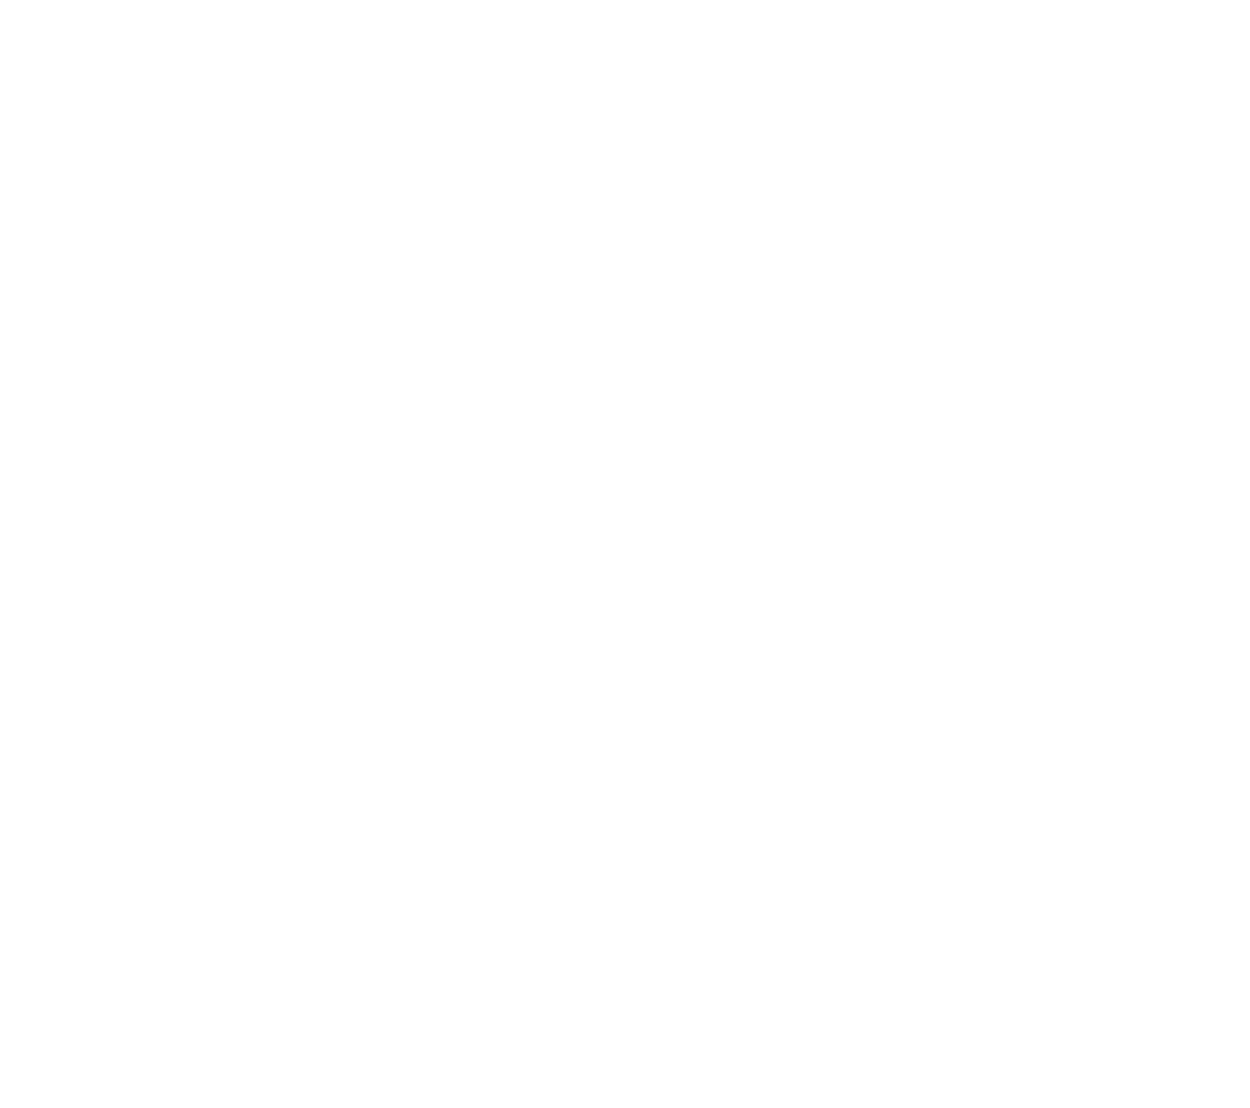 Magnoli logo, which reads "home improvements, carpentry, established 2020".